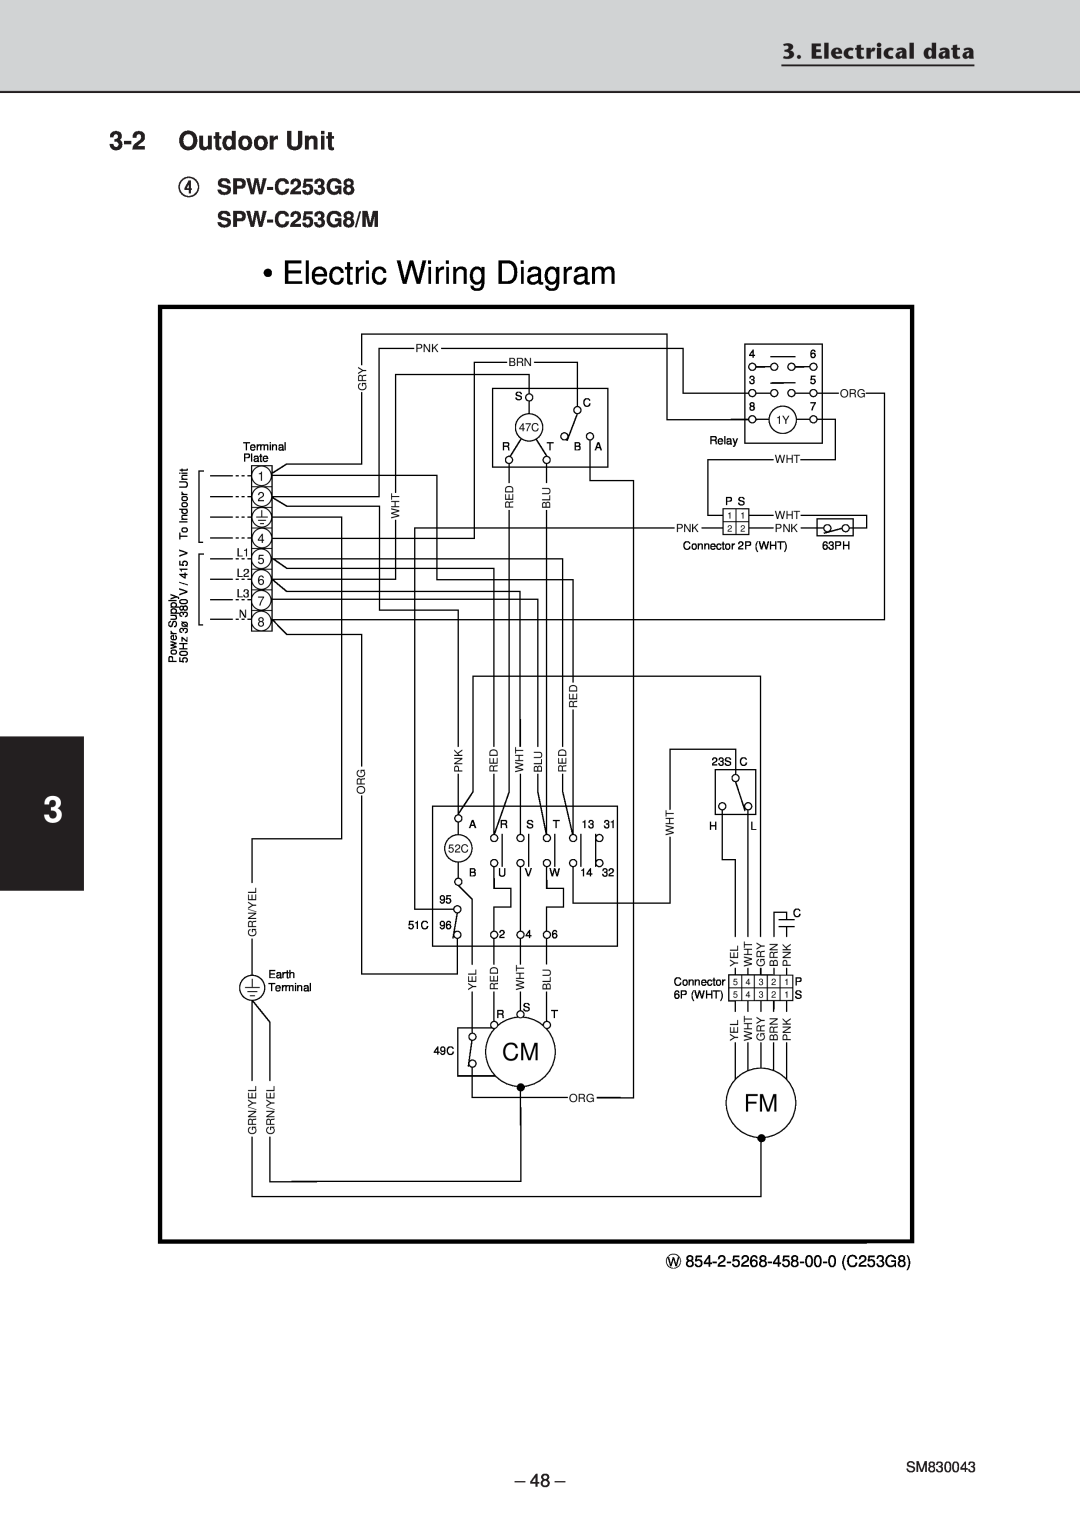 Sanyo SPW-T363GS56, SPW-T483G56 Electric Wiring Diagram, 3-2Outdoor Unit, Electrical data, 4SPW-C253G8 SPW-C253G8/M 